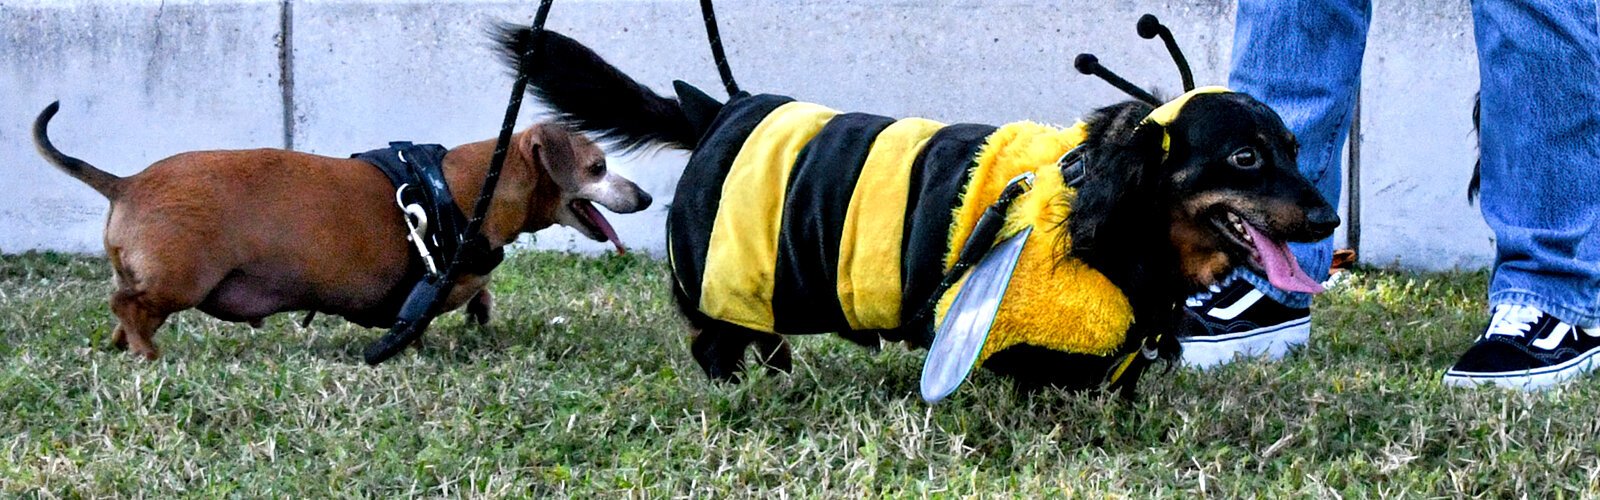 Toby did not mind playing the bee, but his pal Slinky would have none of it and refused to wear his Halloween costume.